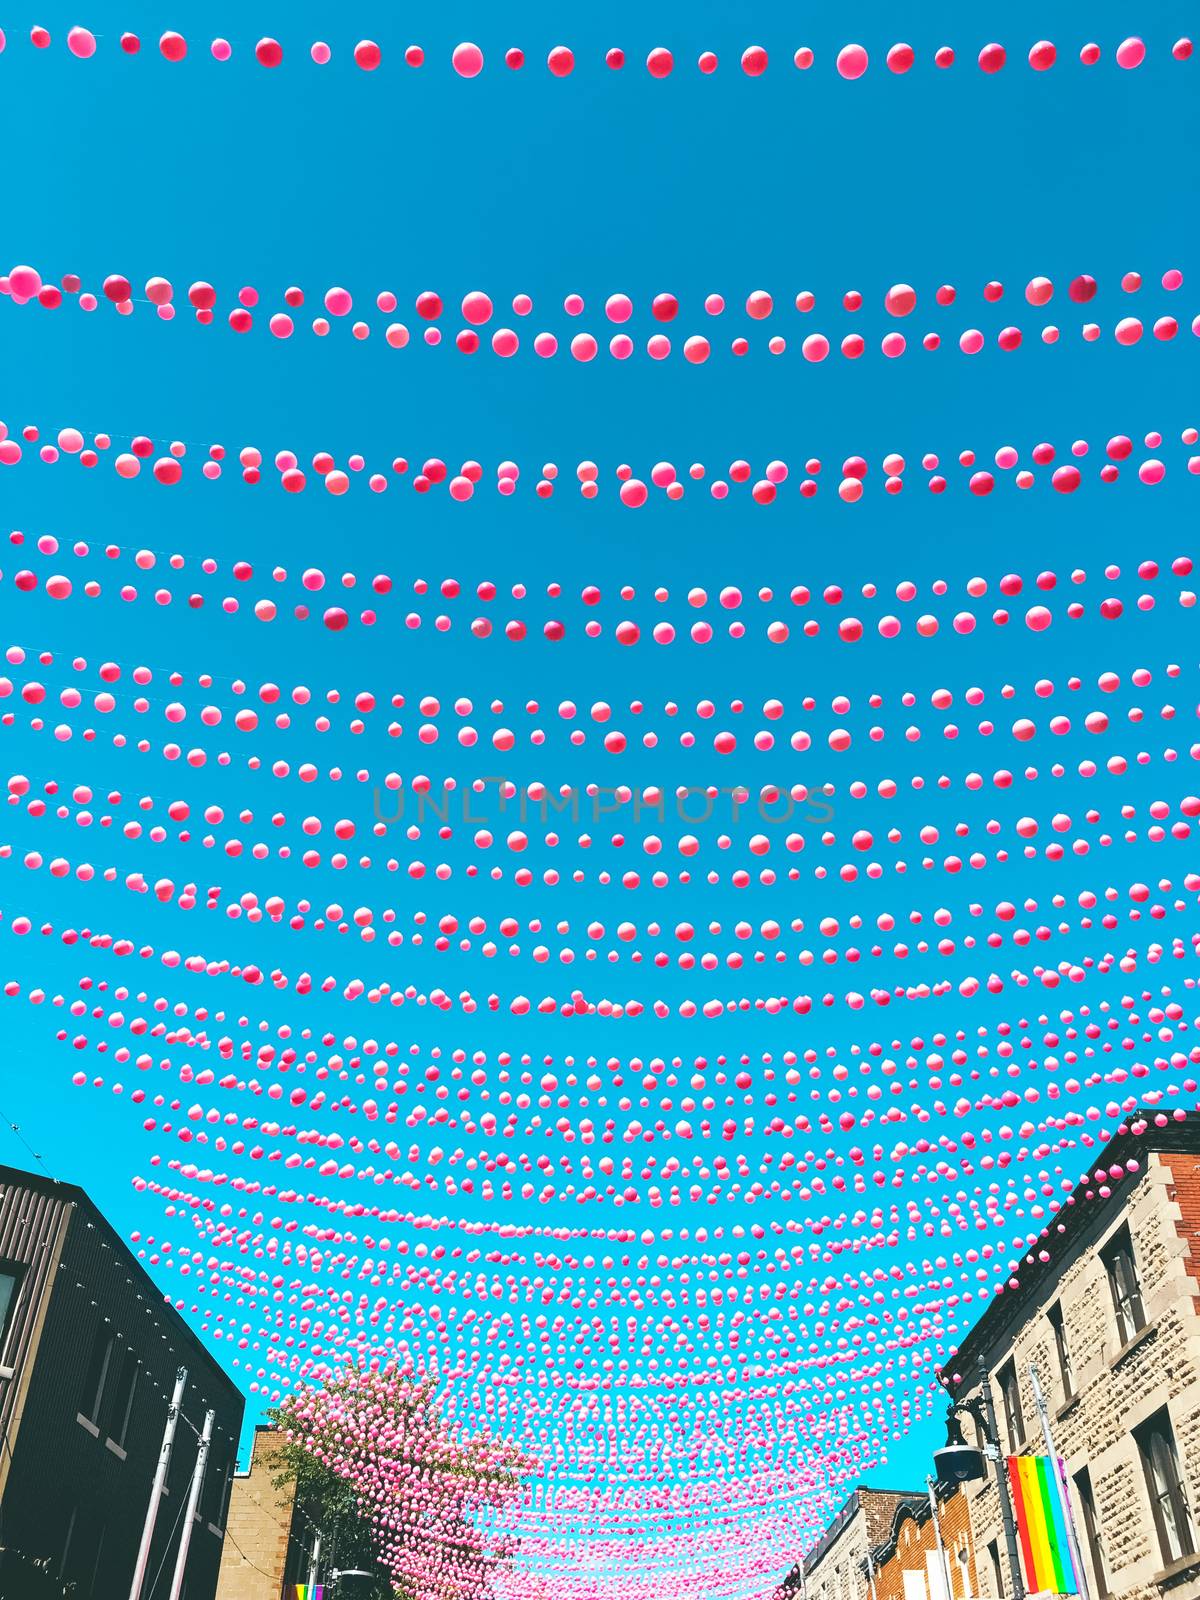 Joyful street in gay neighborhood decorated with pink balloons. Annual summer installation in gay village on Ste-Catherine street, Montreal (Quebec, Canada).